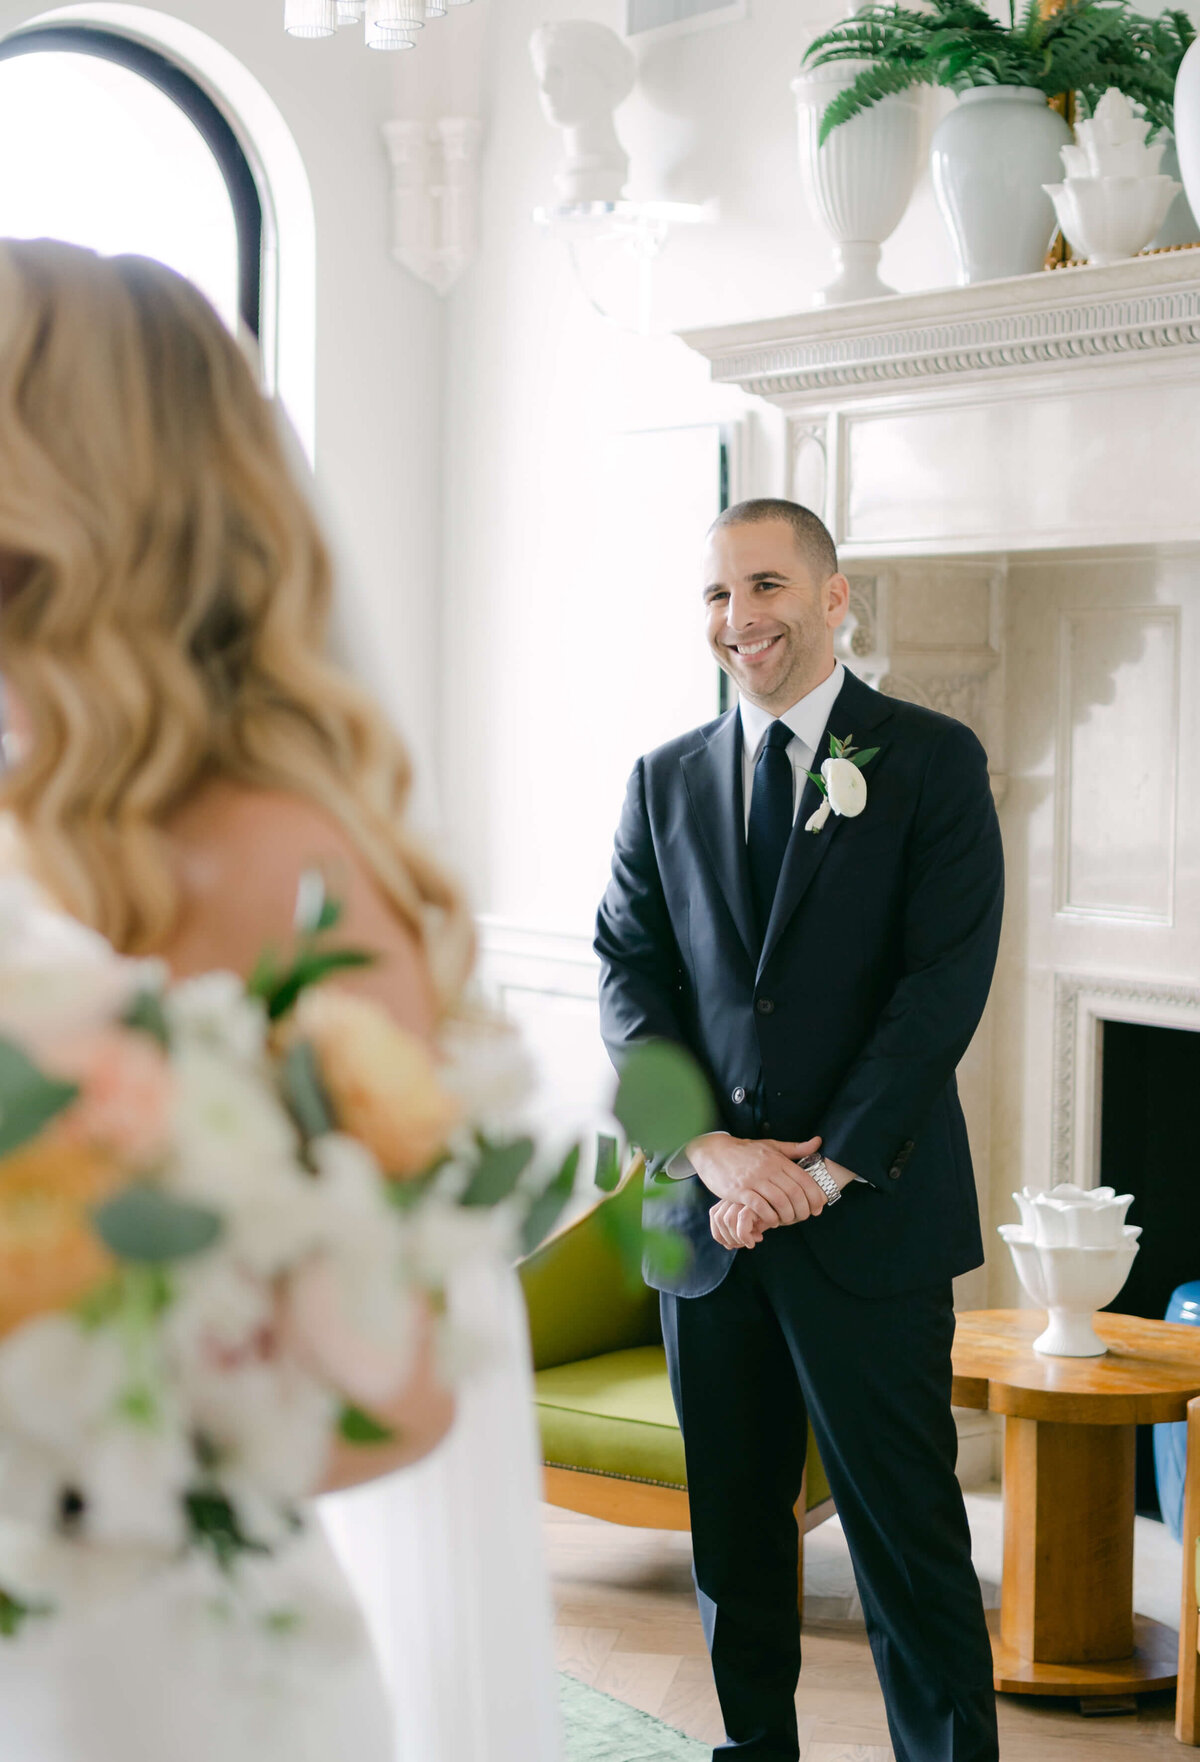 A groom smiles seeing his bride for the first time.